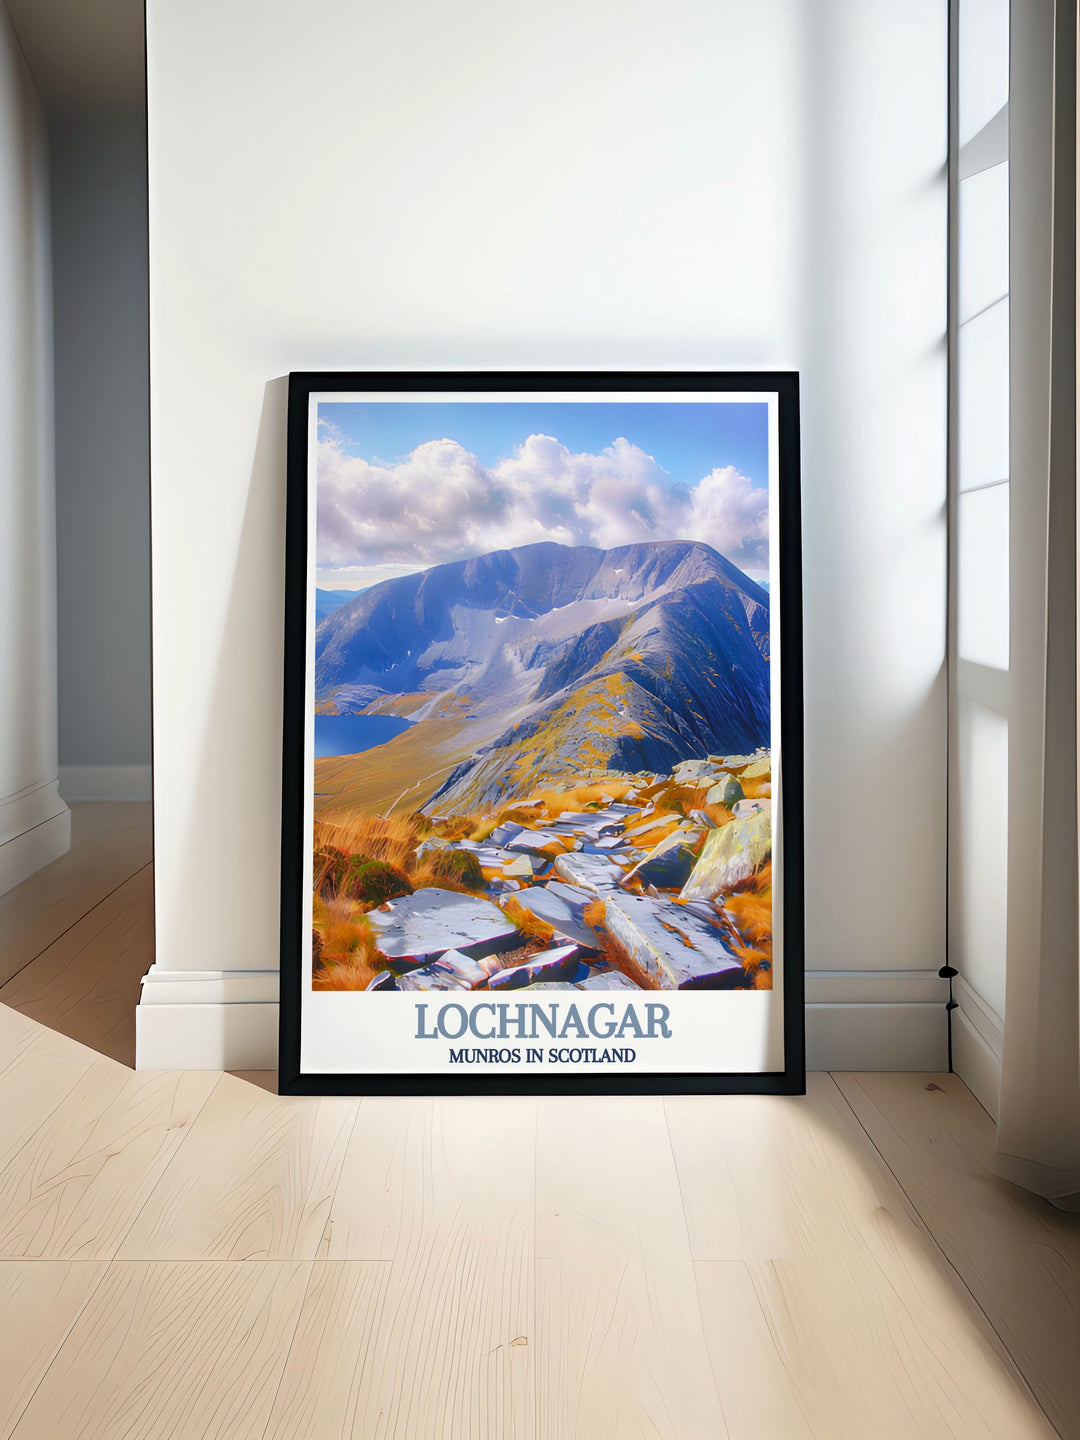 Lochnagar Summit Travel Poster capturing the breathtaking beauty of the Munros of Scotland with a vintage travel print style showcasing the majestic Scottish Highlands perfect for home decor and nature enthusiasts who love the Scottish mountains and national park prints